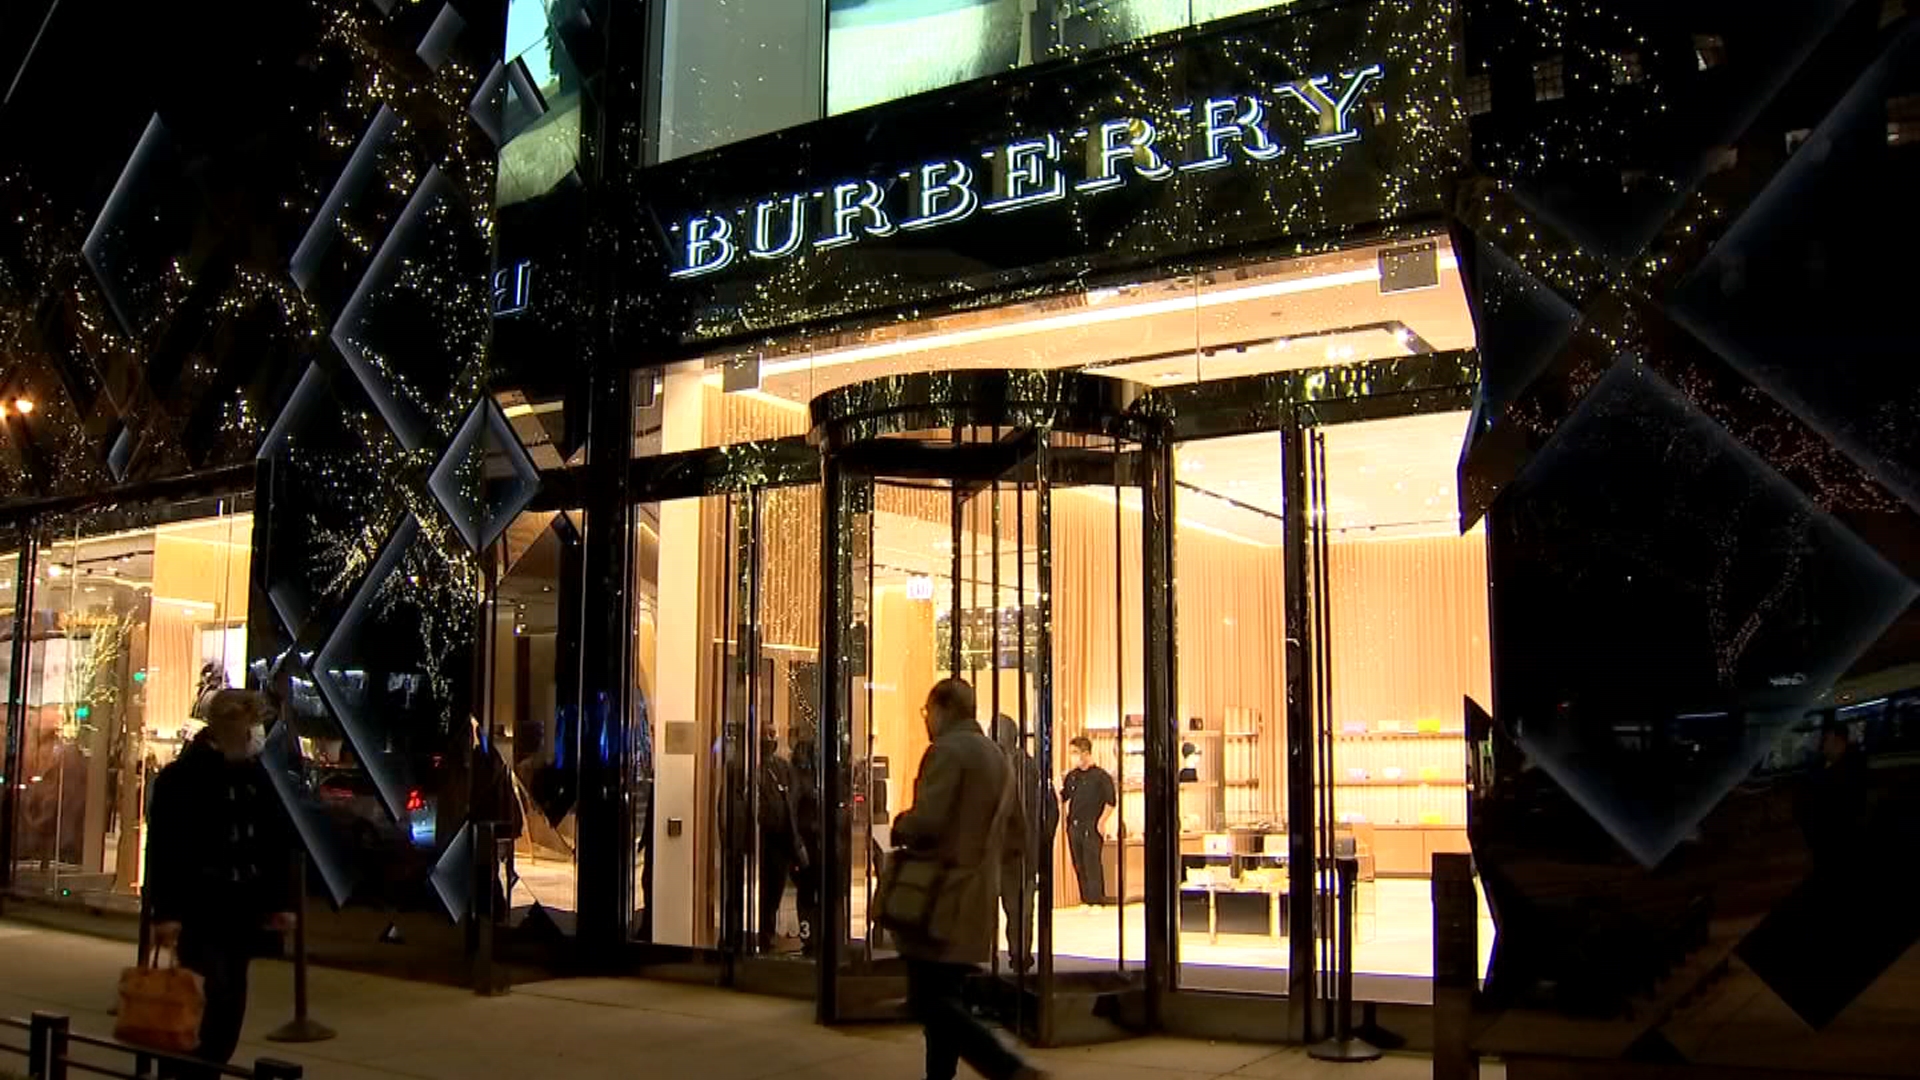 14 Suspects Involved In Grab-And-Run Theft At Louis Vuitton Store At Oakbrook  Center Mall, Police Say - CBS Chicago